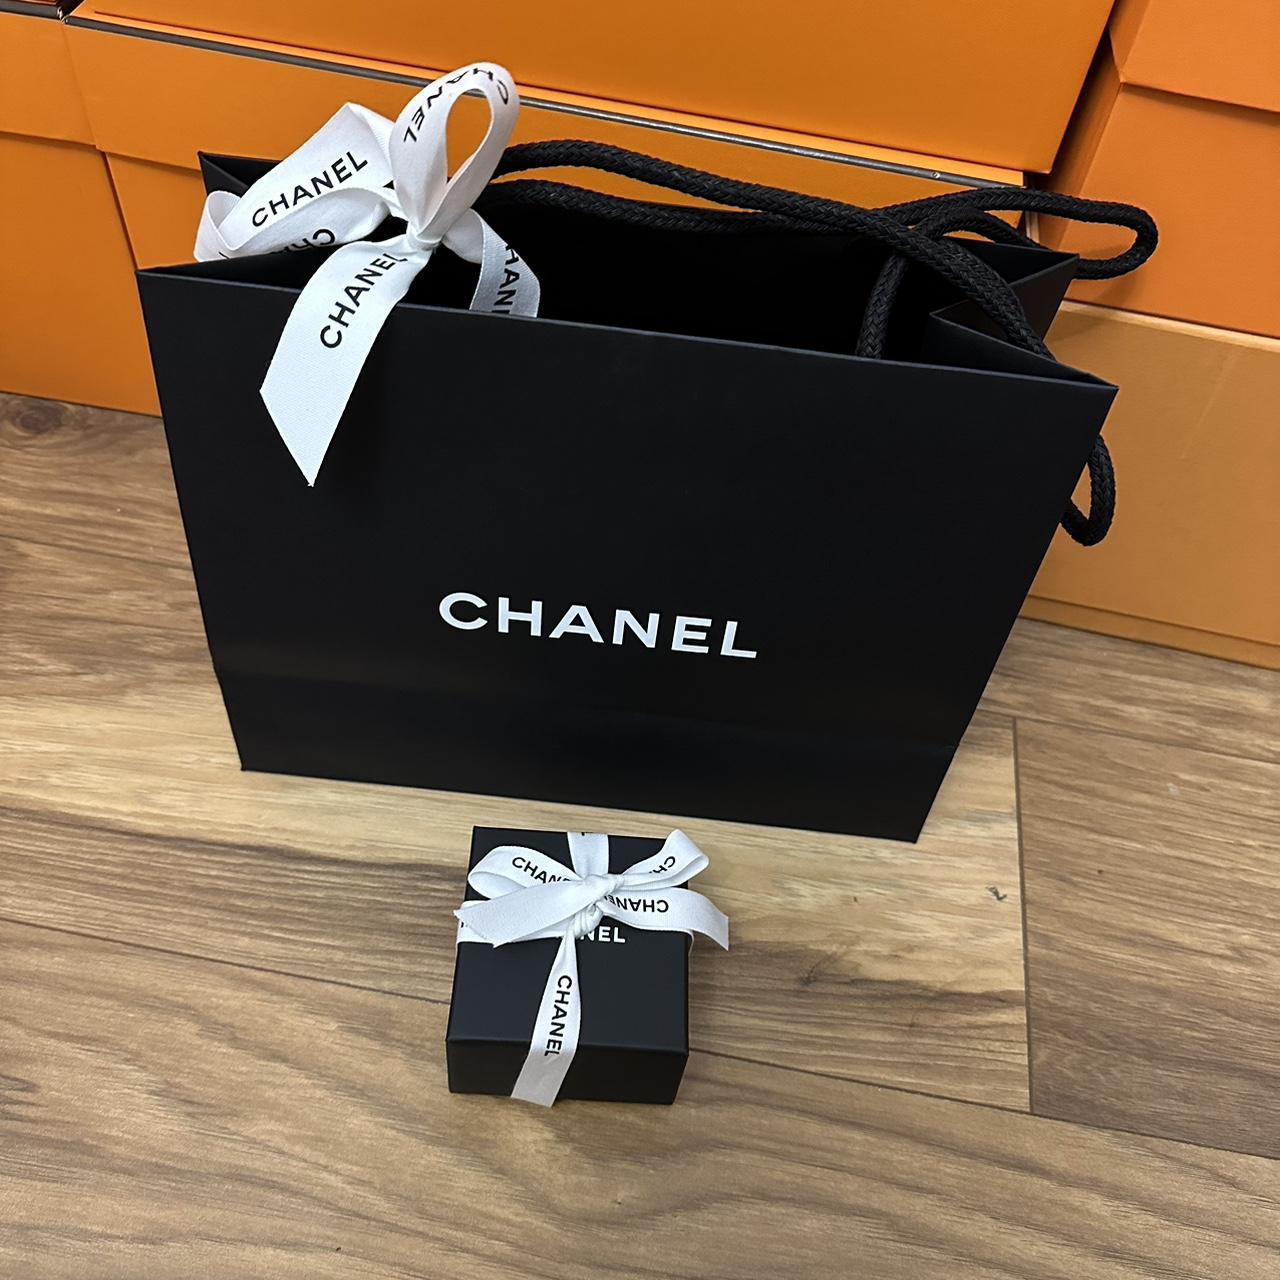 Chanel gifts bag . Size 5.5x4.4x2. Included